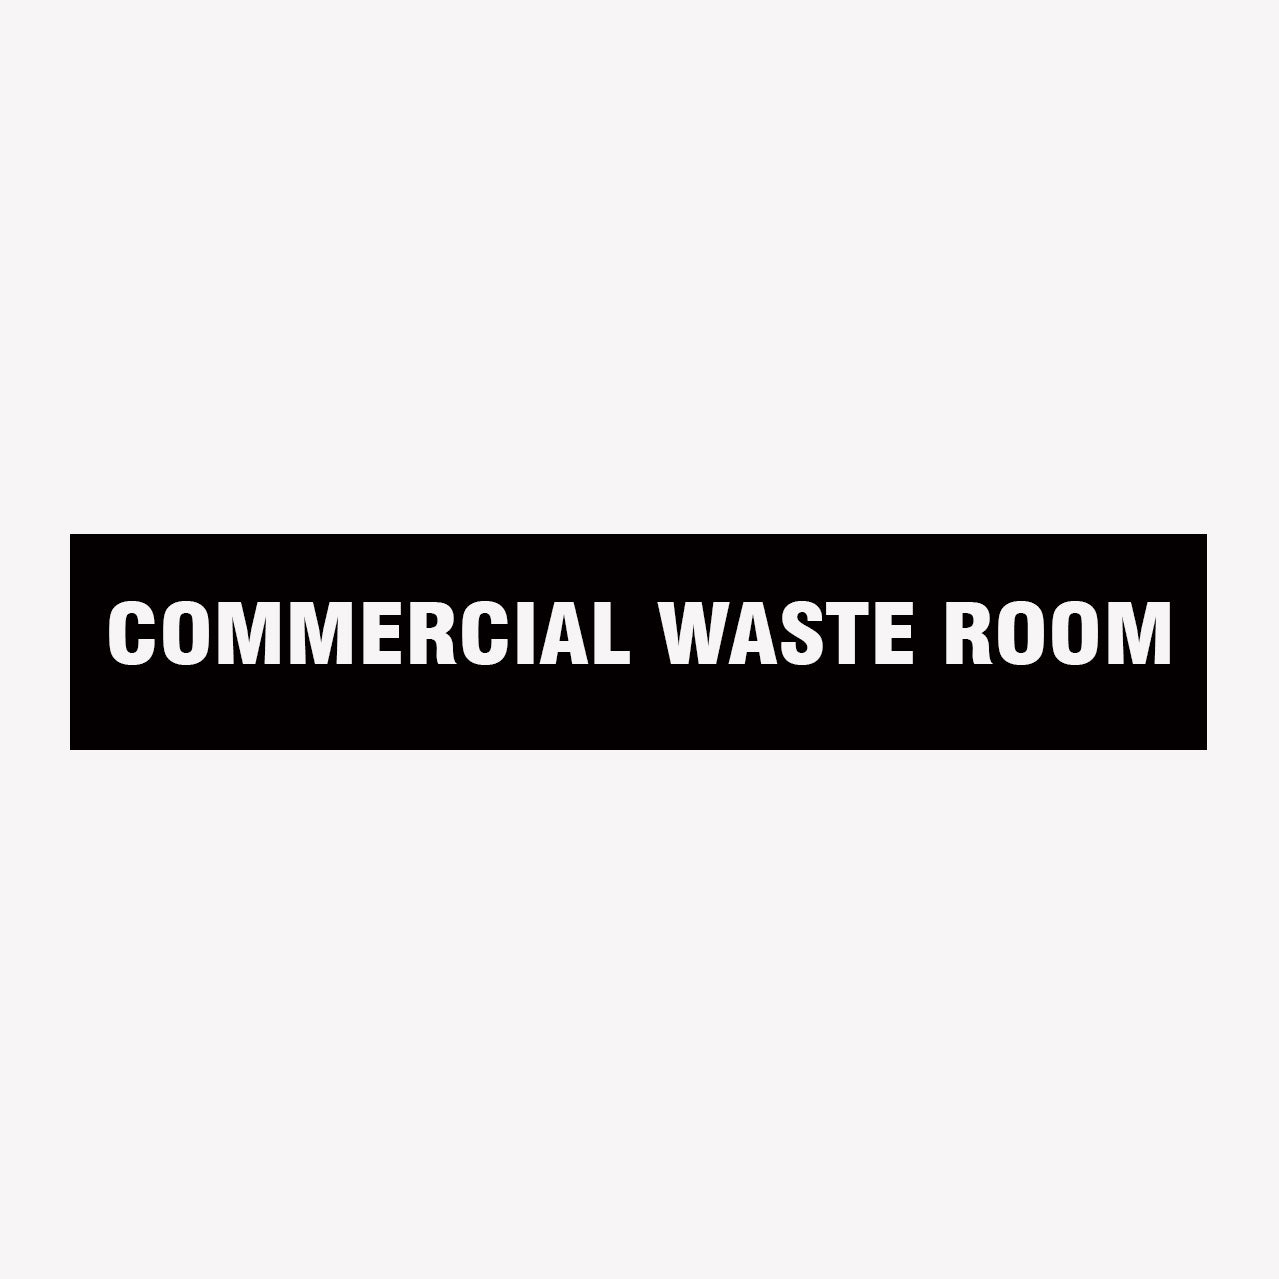 COMMERCIAL WASTE ROOM SIGN